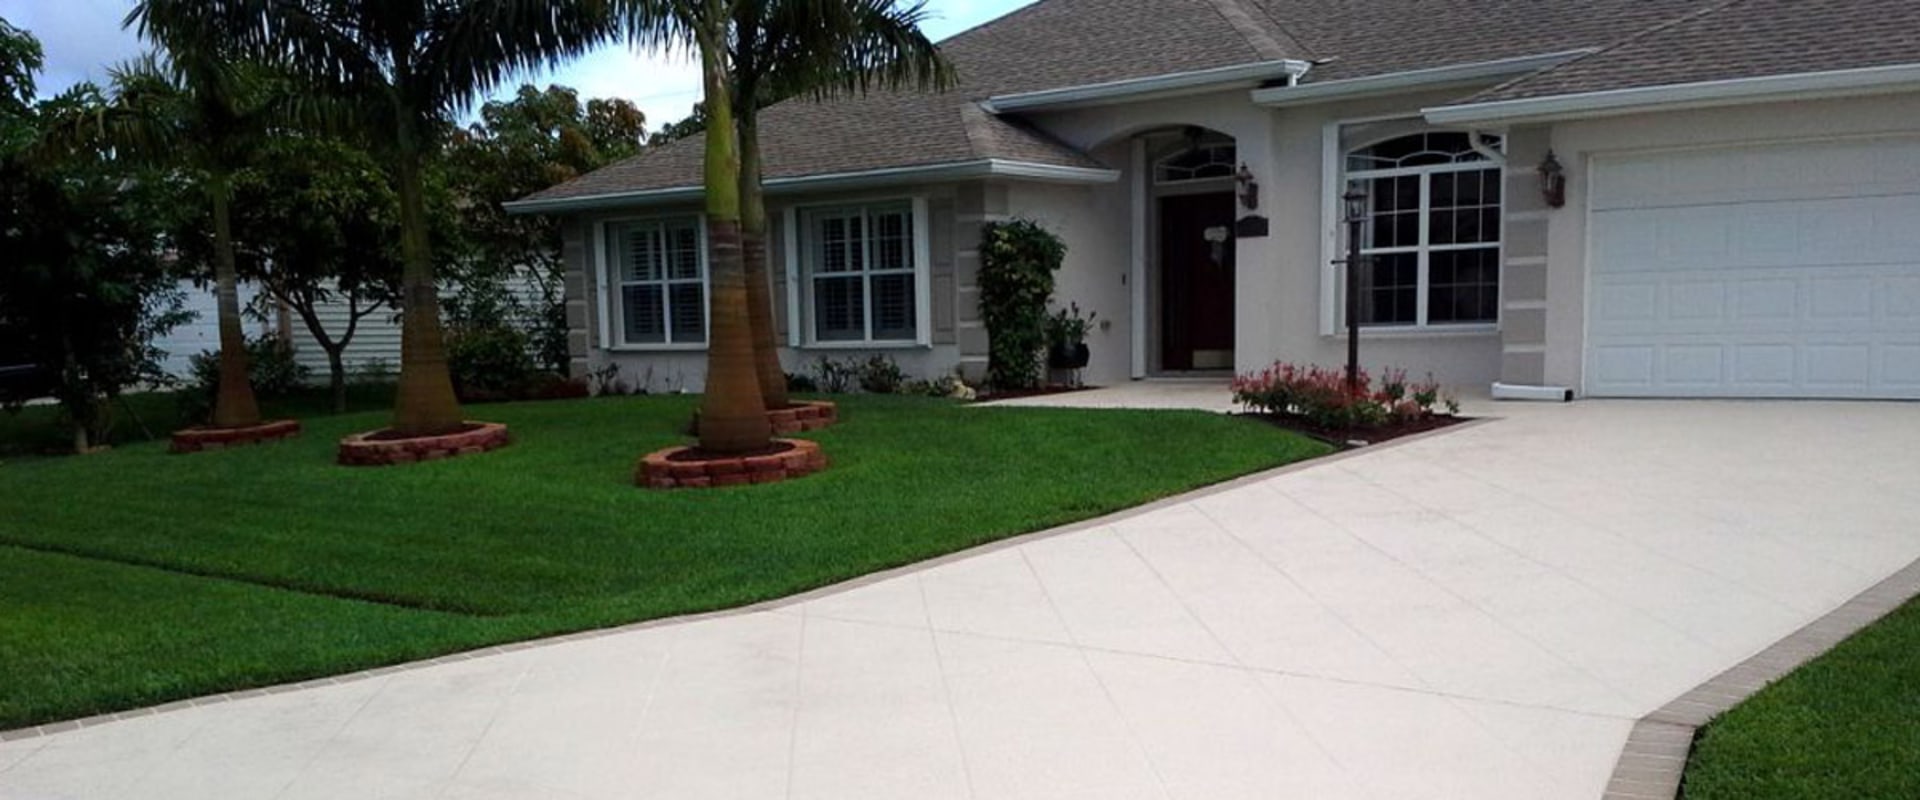 Is concrete overlay good for driveways?